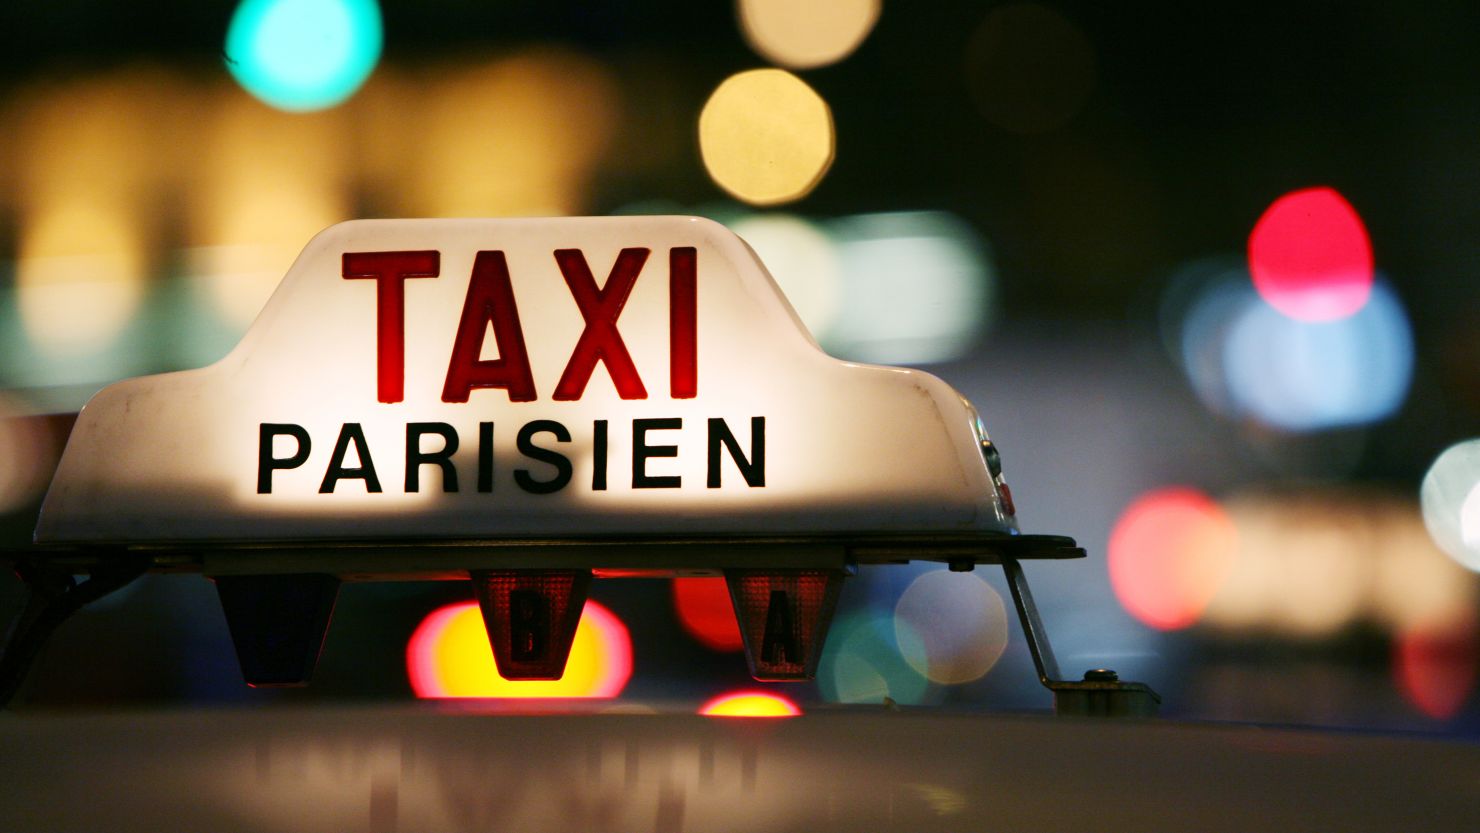 Oo la la: Taxis in Paris might be hard to find at times, but Tokyo tops the pile when it comes to the price of an airport trip.